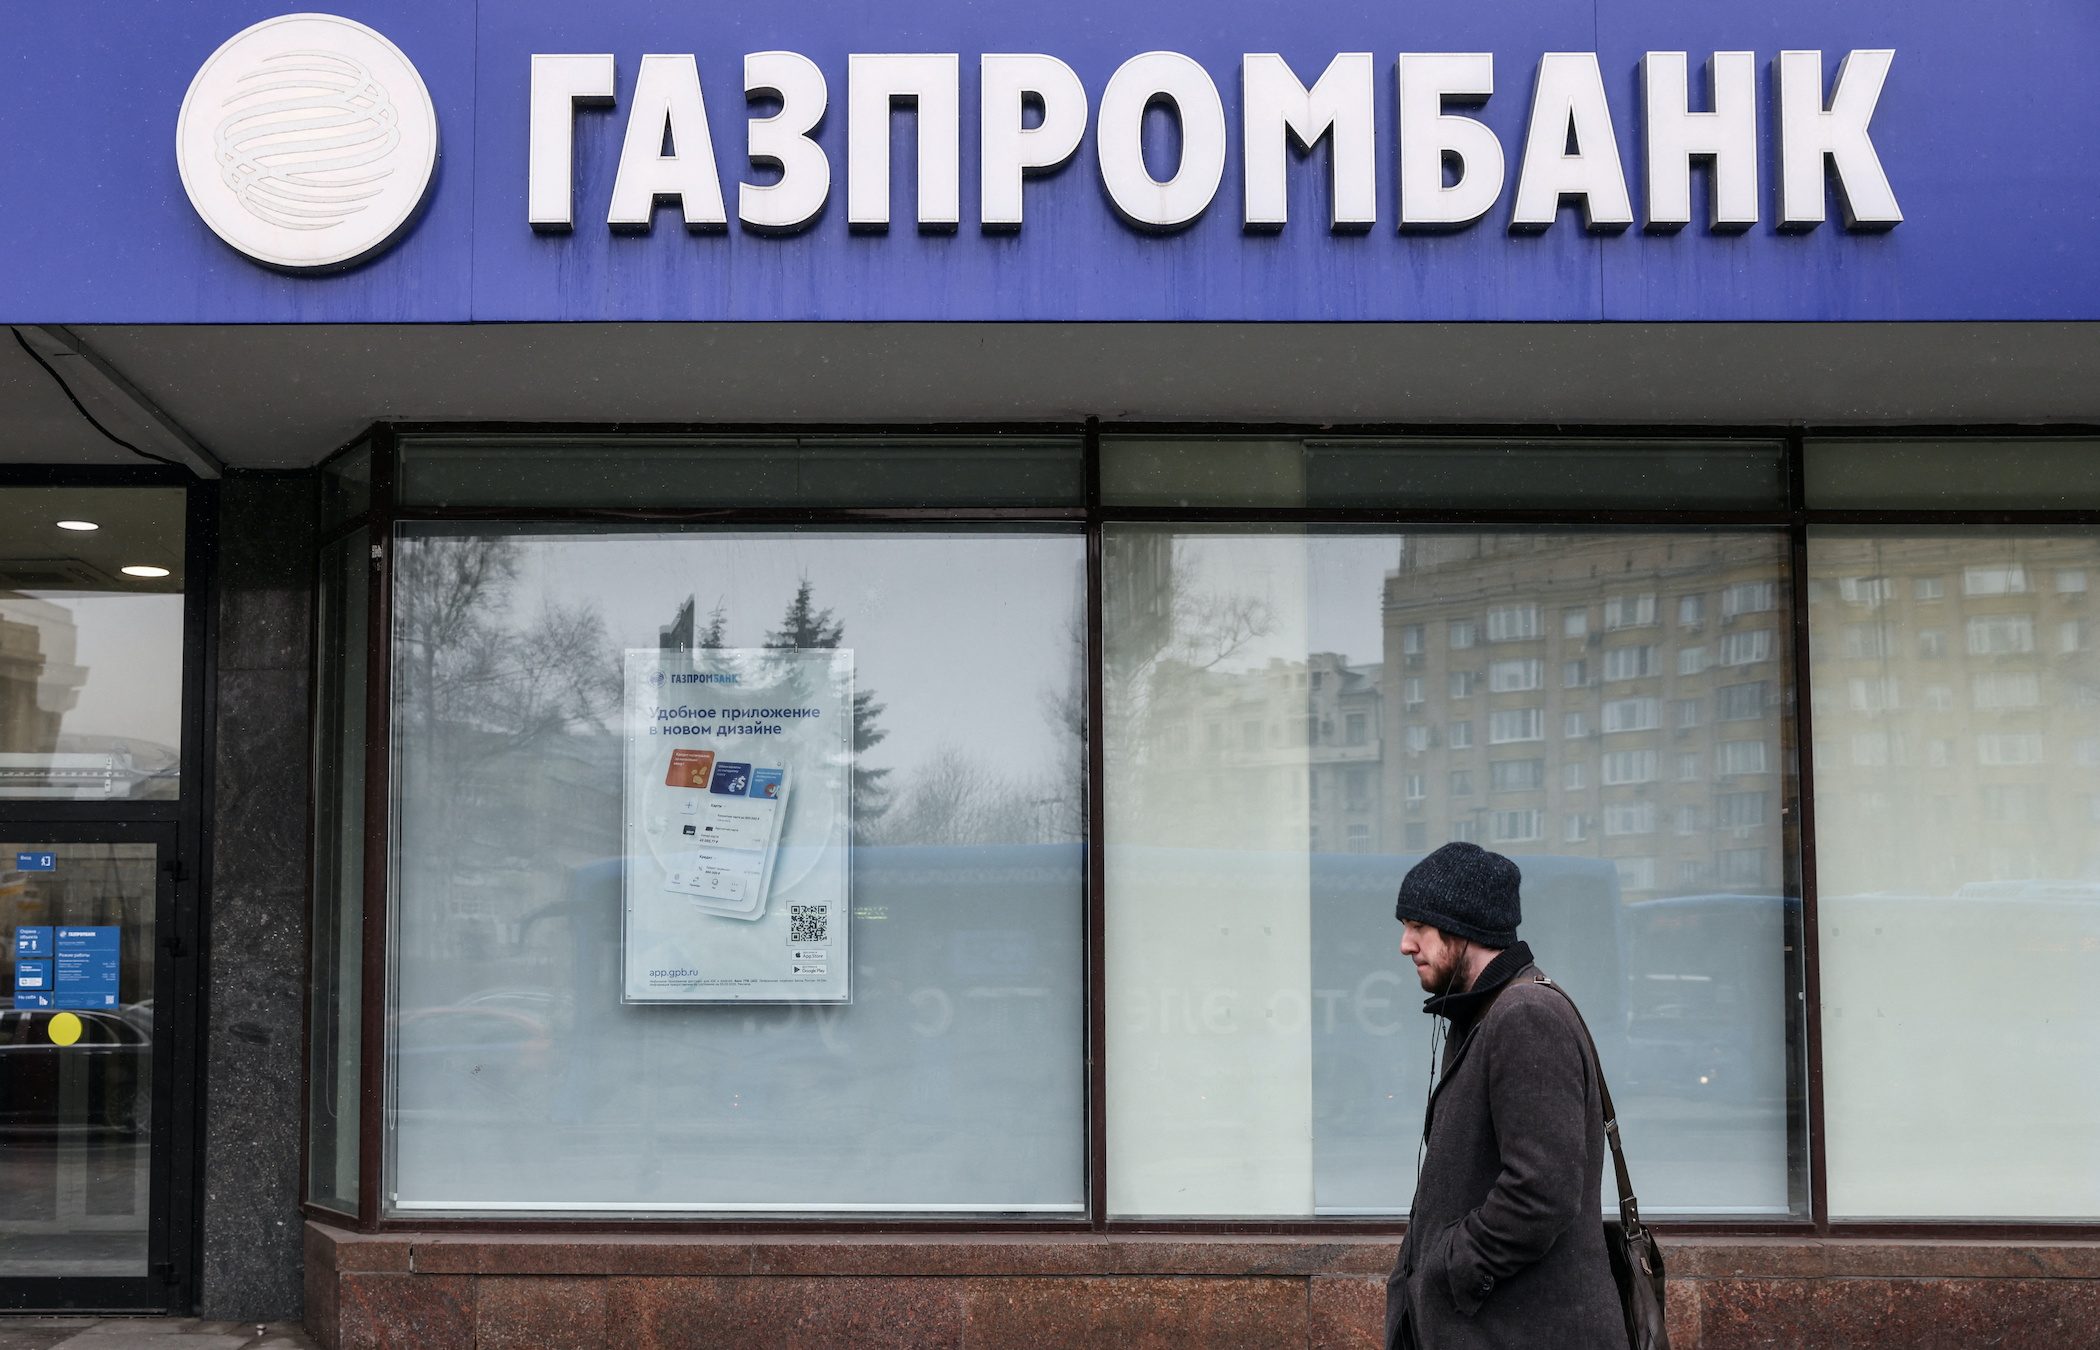 Russia central bank will not name banks linked to SWIFT alternative